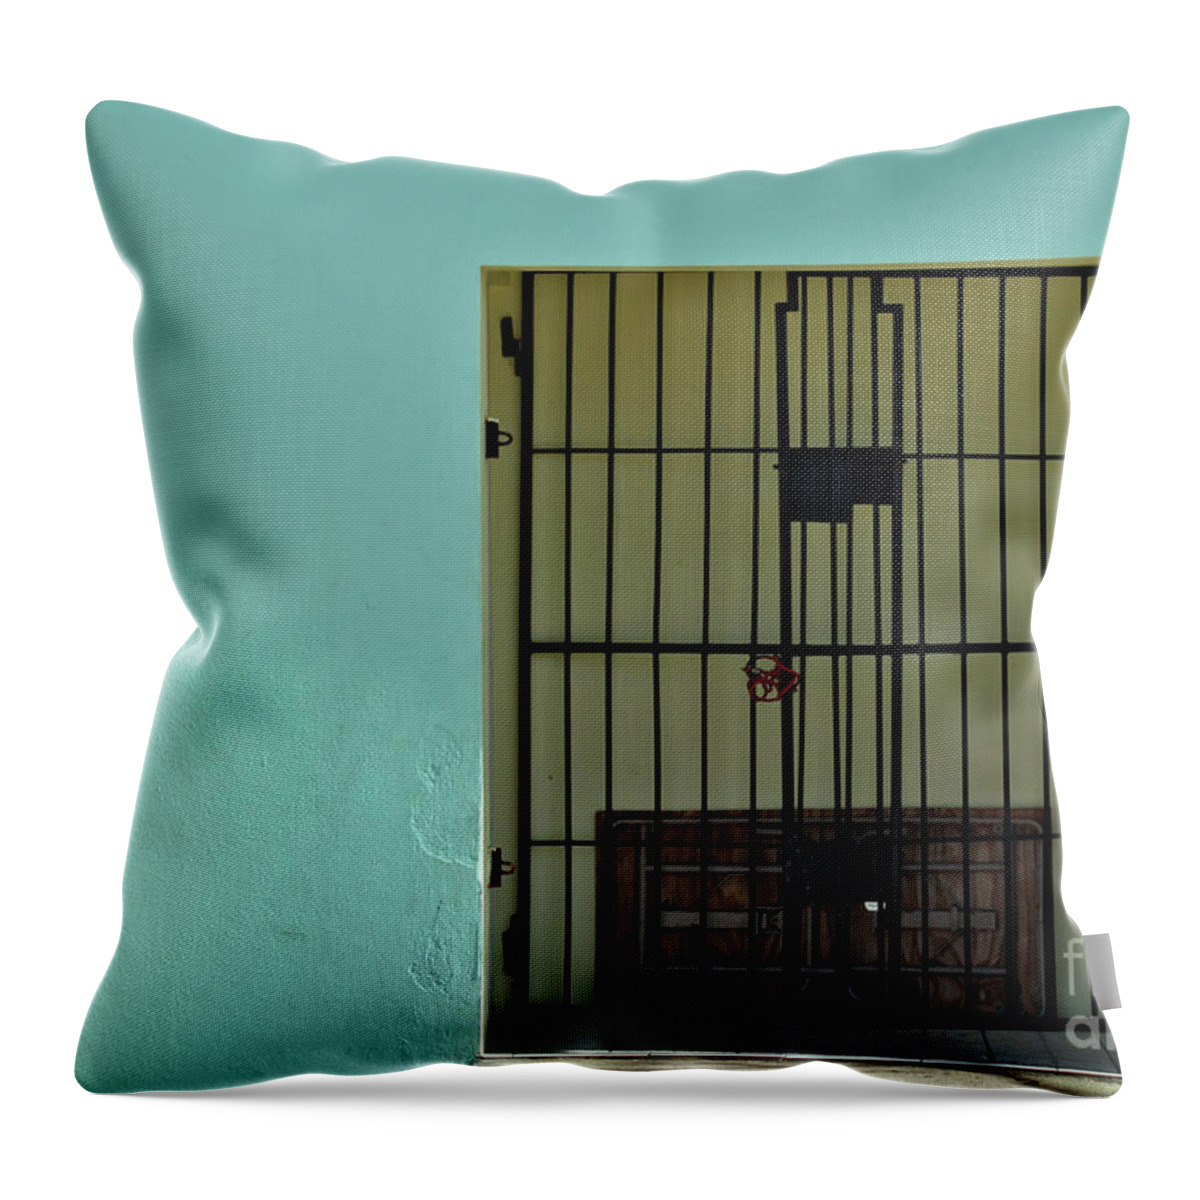 Blue Throw Pillow featuring the photograph Blue Gate by Kathy Strauss